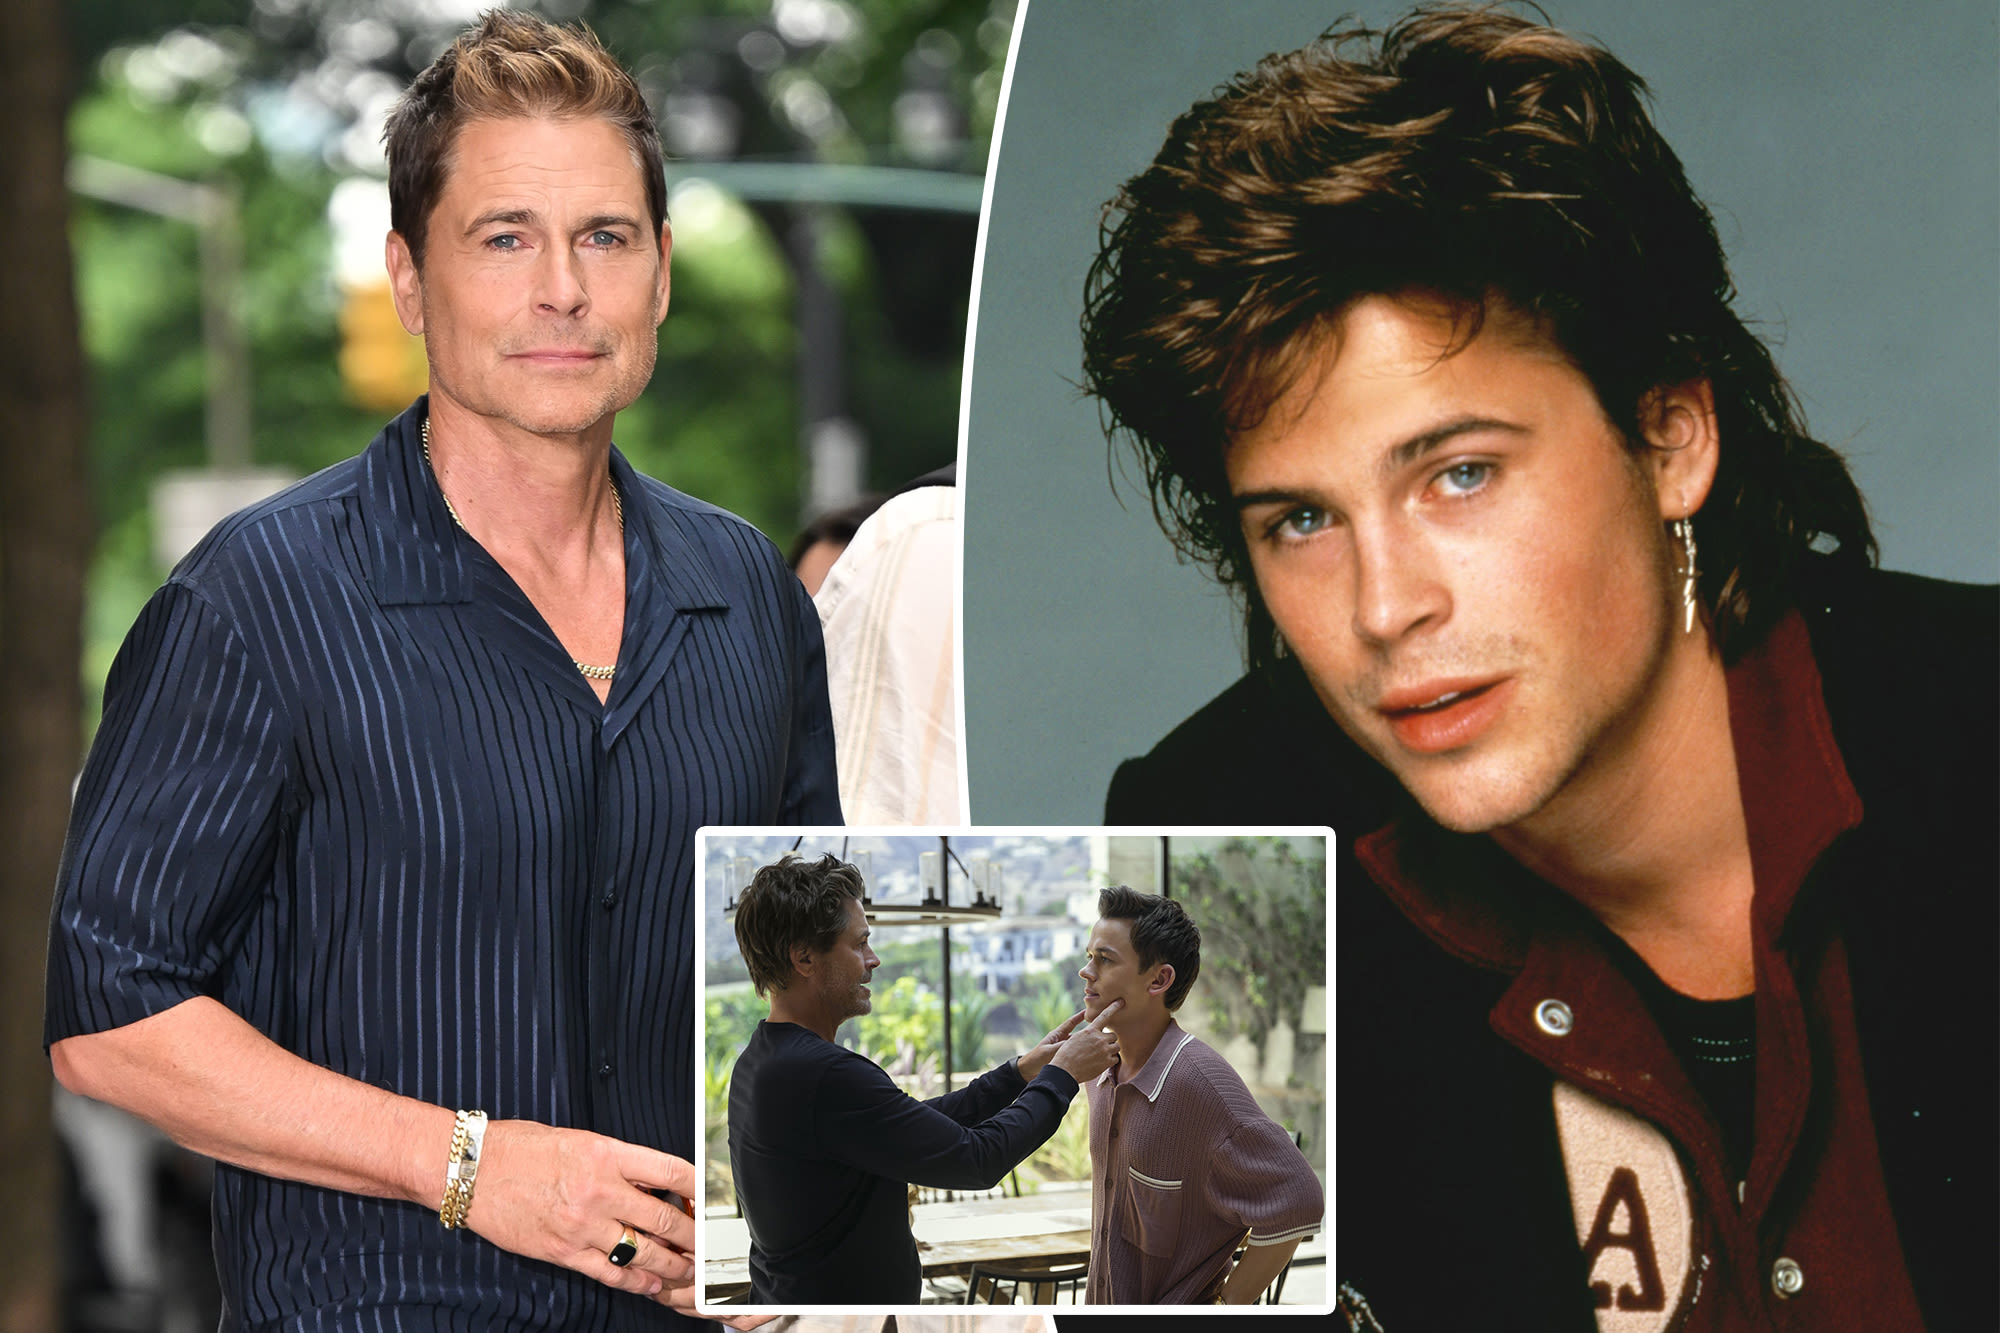 Rob Lowe: ‘Nepo baby’ is the new ‘Brat Pack’: ‘I’ve been there for both of them’